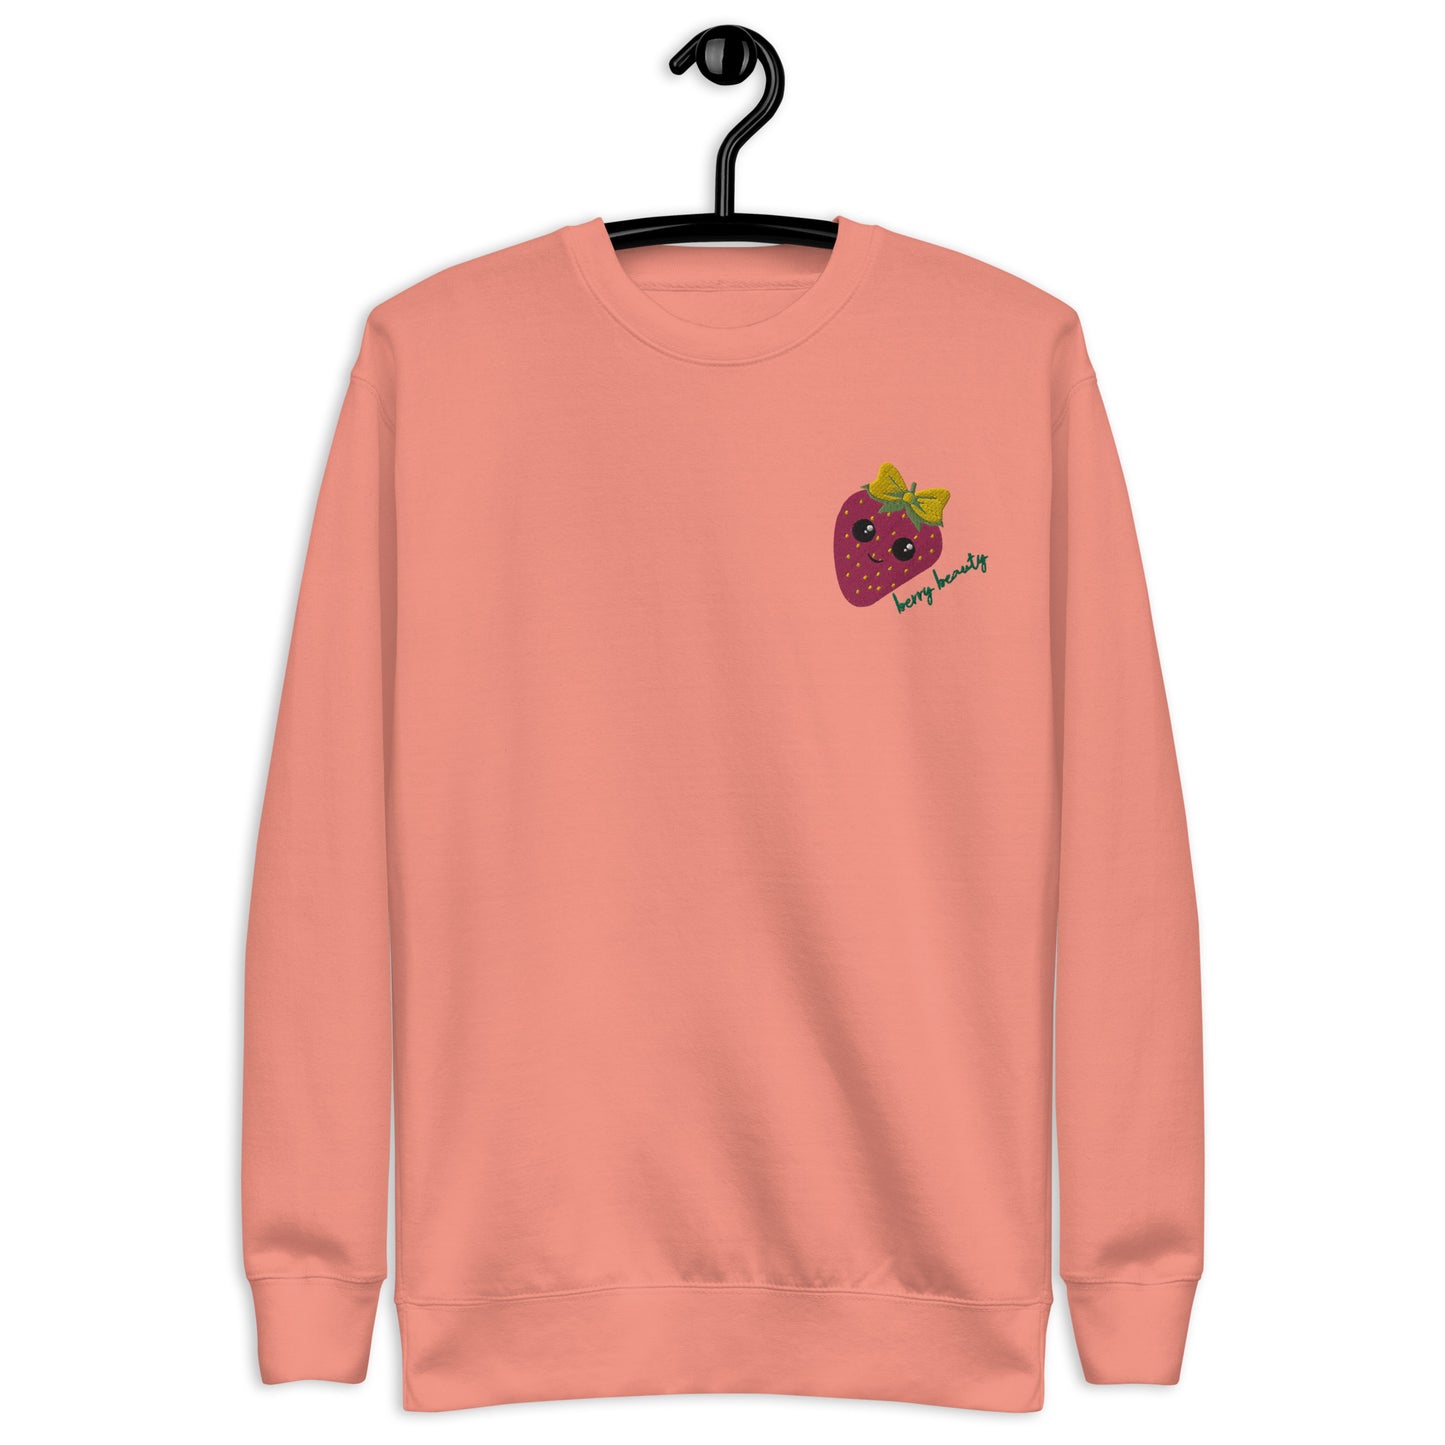 "Berry Beauty" Embroidered Coral Pink Sweatshirt (S-3XL)